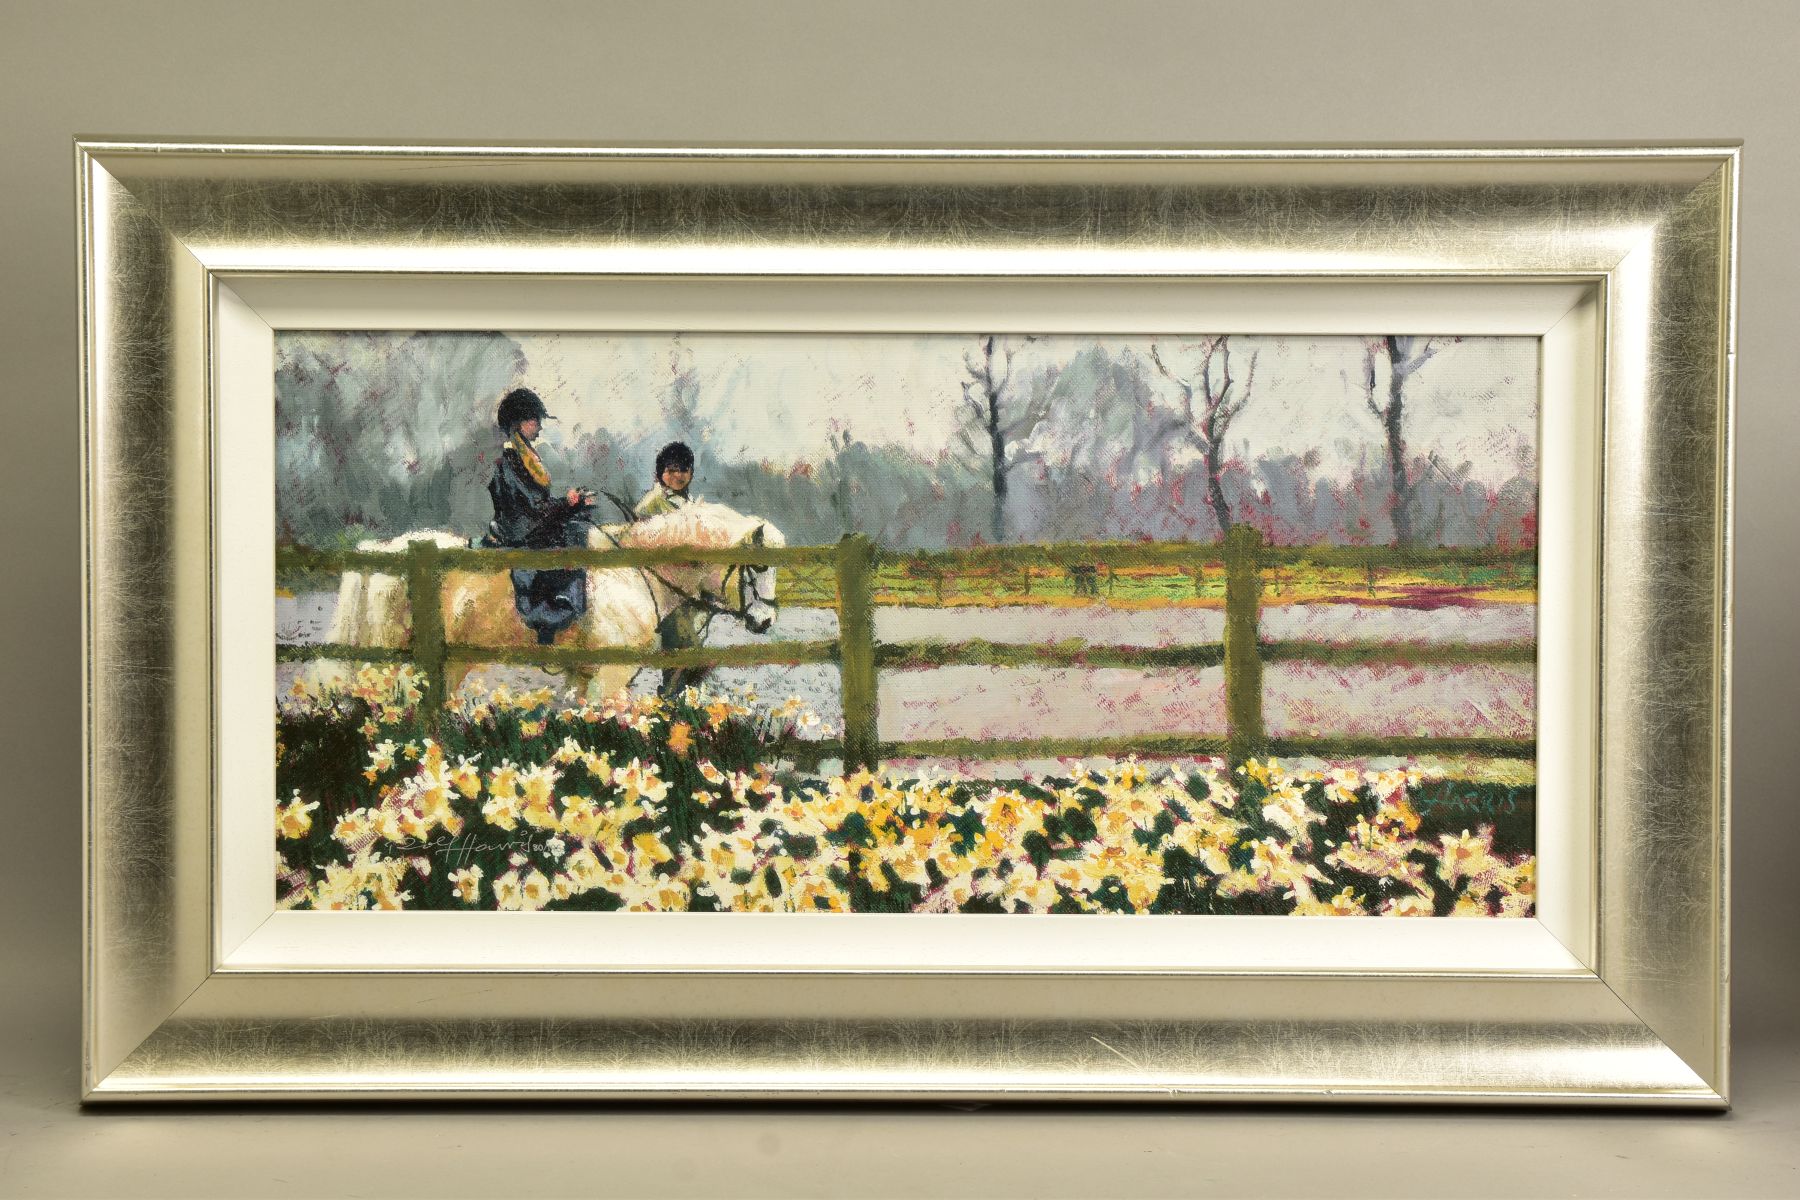 ROLF HARRIS (AUSTRALIAN 1930), 'RIDING IN THE SPRING', a limited edition print of a child riding a - Image 2 of 16